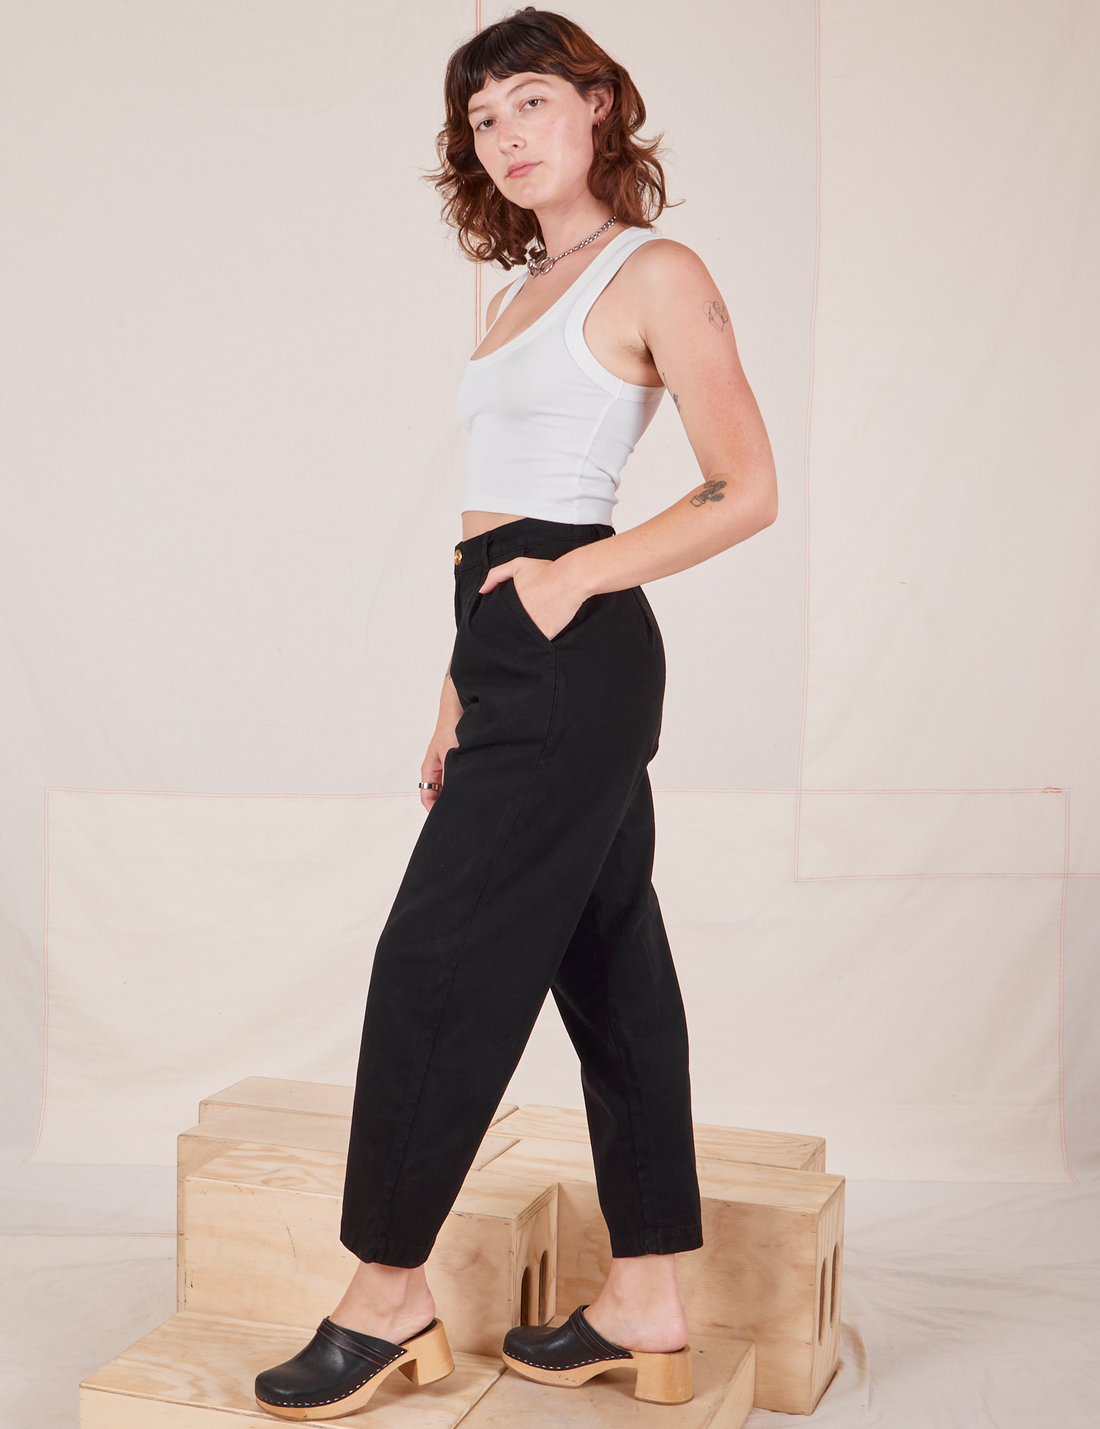 Side view of Heavyweight Trousers in Basic Black and vintage off-white Cropped Tank Top worn by Alex.